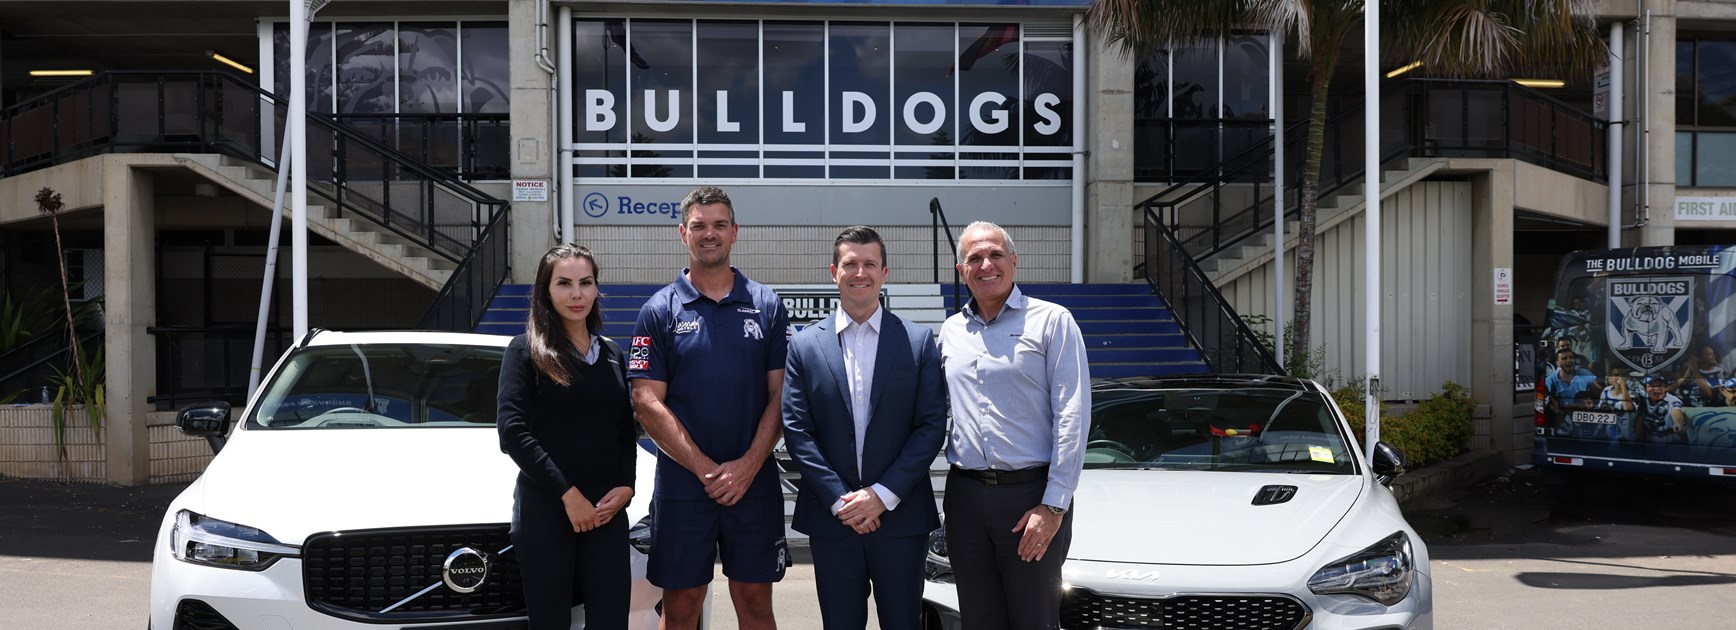 Suttons backs the Bulldogs in 2023